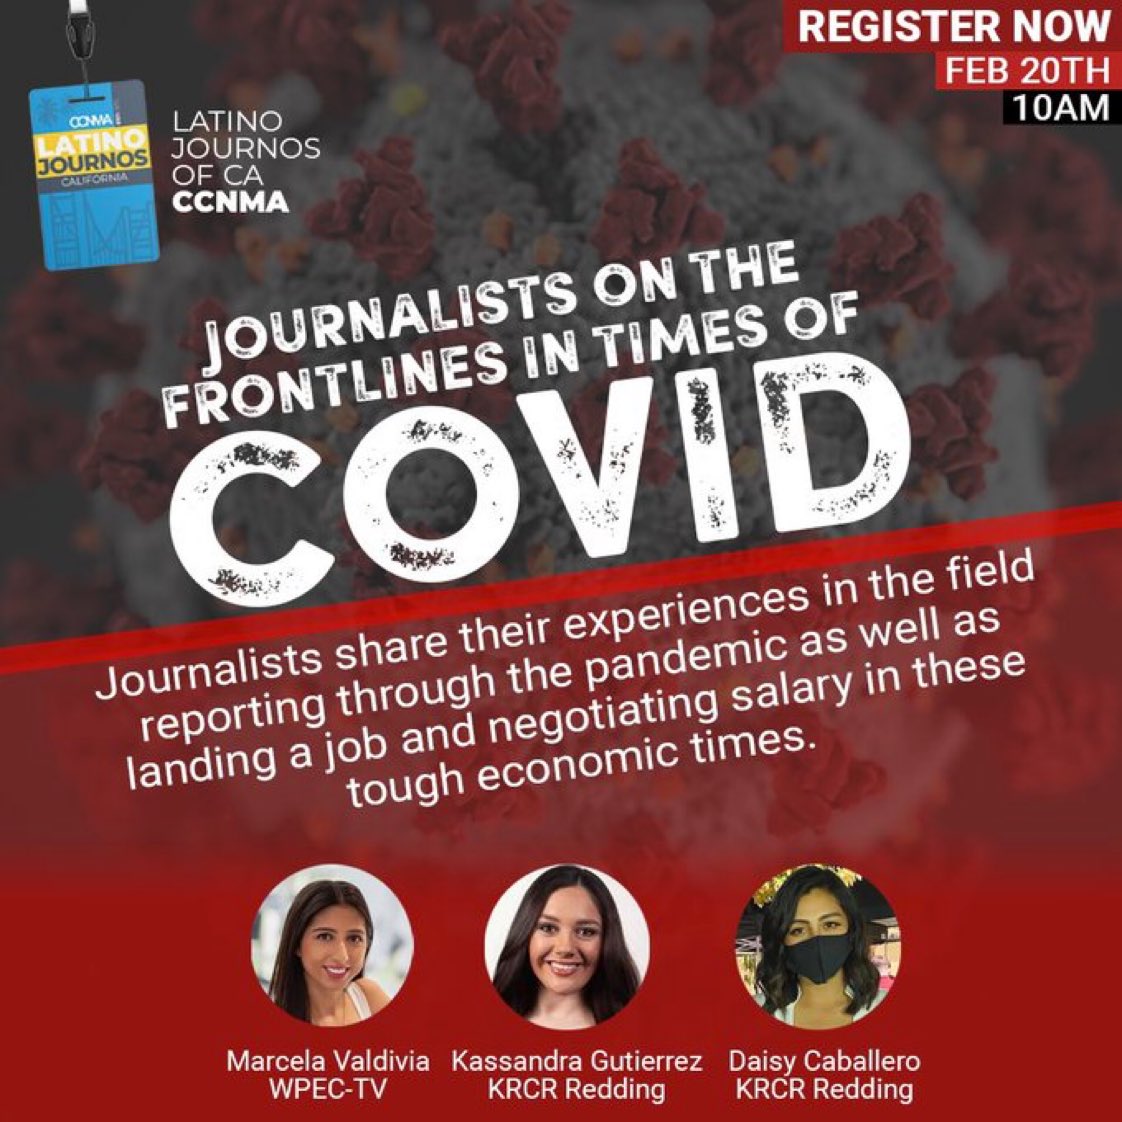 Reminder: Join the discussion 'Journalists on the frontlines in times of #COVID this Saturday.  @LatinoJournosCA Secretary @KassGutierrezTV leads the talk with journalists @KRCRDaisy and @Marcy_Valdivia on Feb 20th at 10am. Register here: eventbrite.com/e/journalists-…